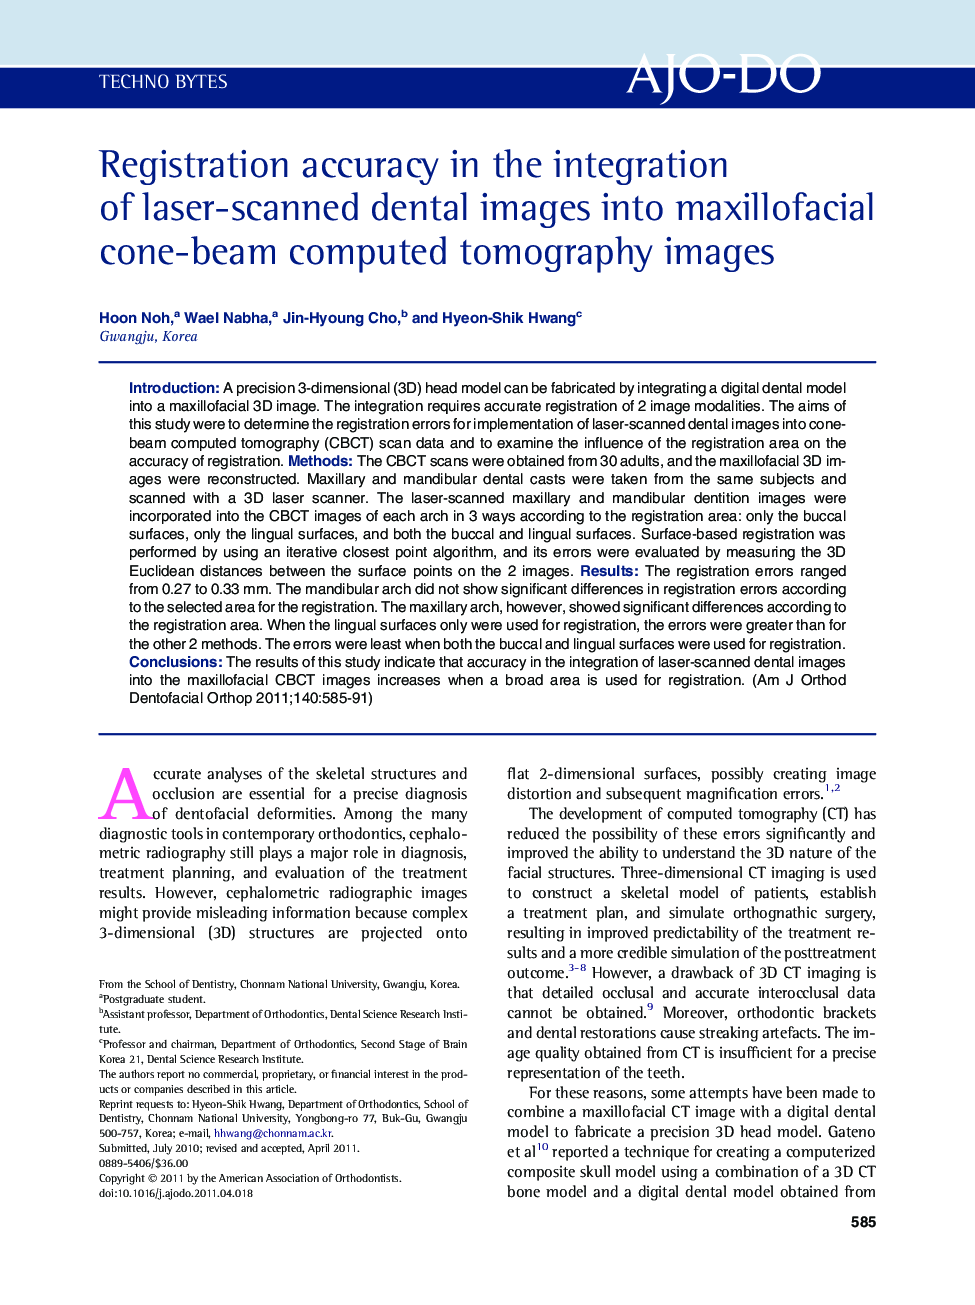 Registration accuracy in the integration of laser-scanned dental images into maxillofacial cone-beam computed tomography images 